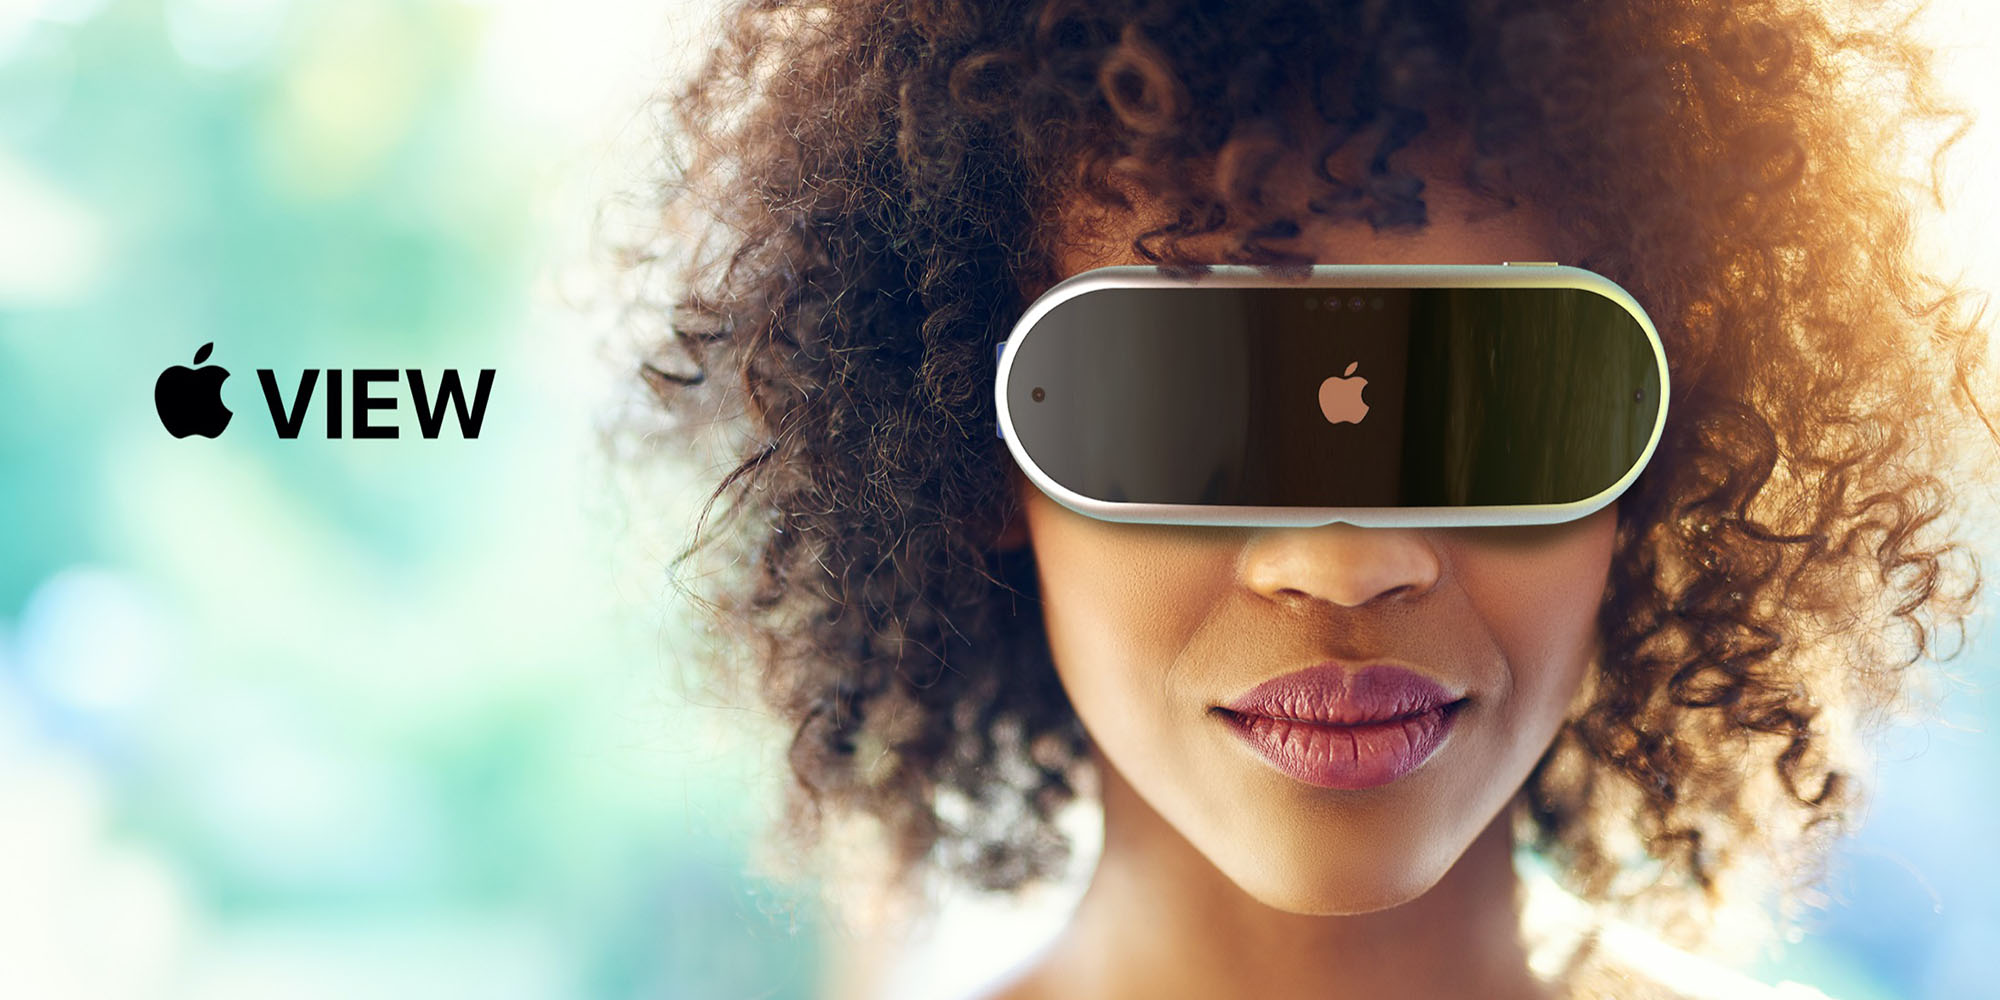 vr headset for macbook air